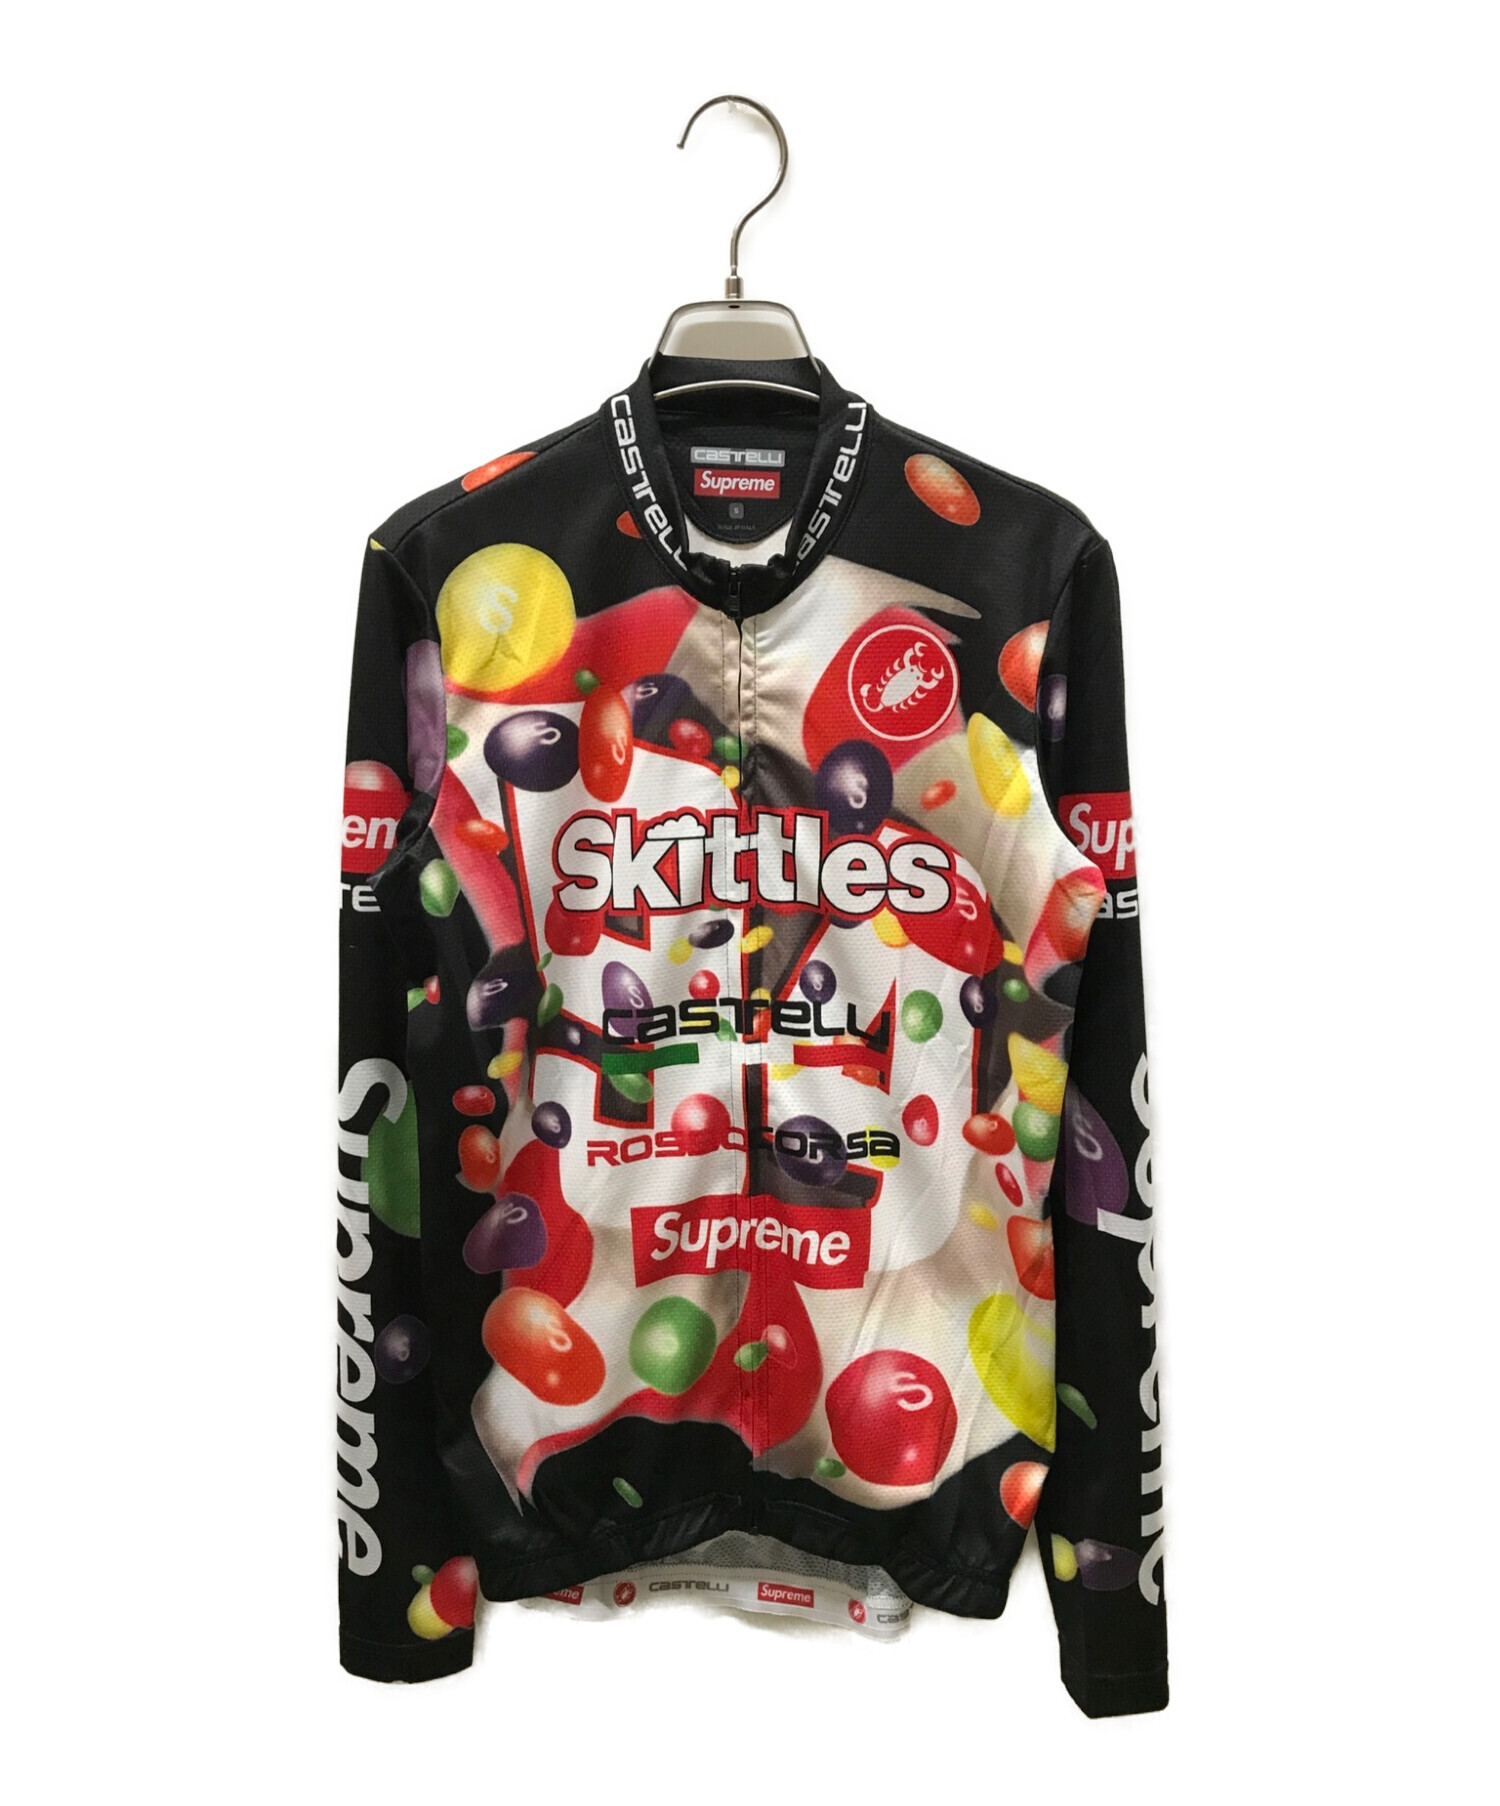 Supreme®/Castelli Cycling Jerseyトップス